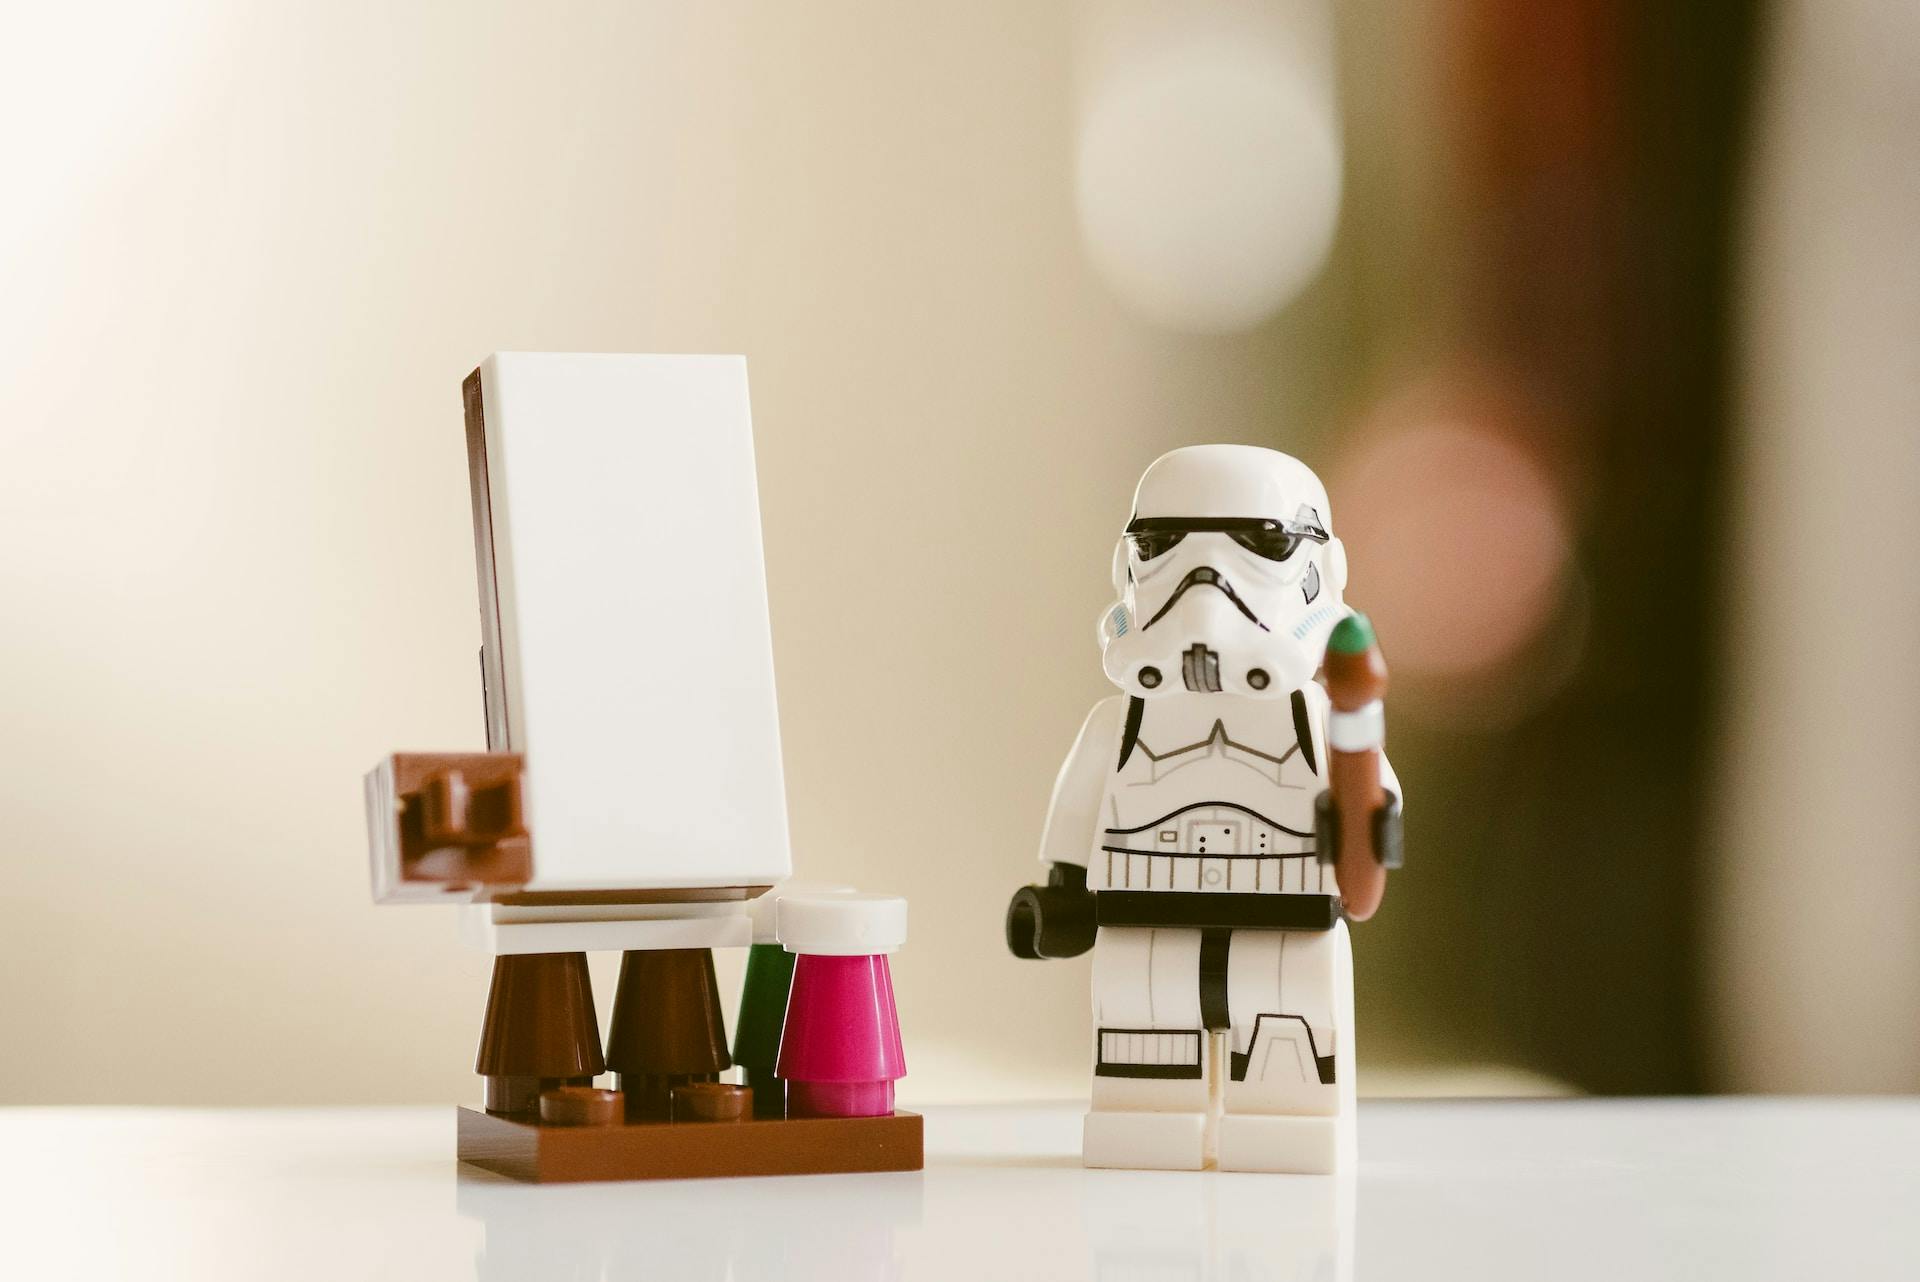 Lego storm trooper holding a paintbrush next to a blank canvas